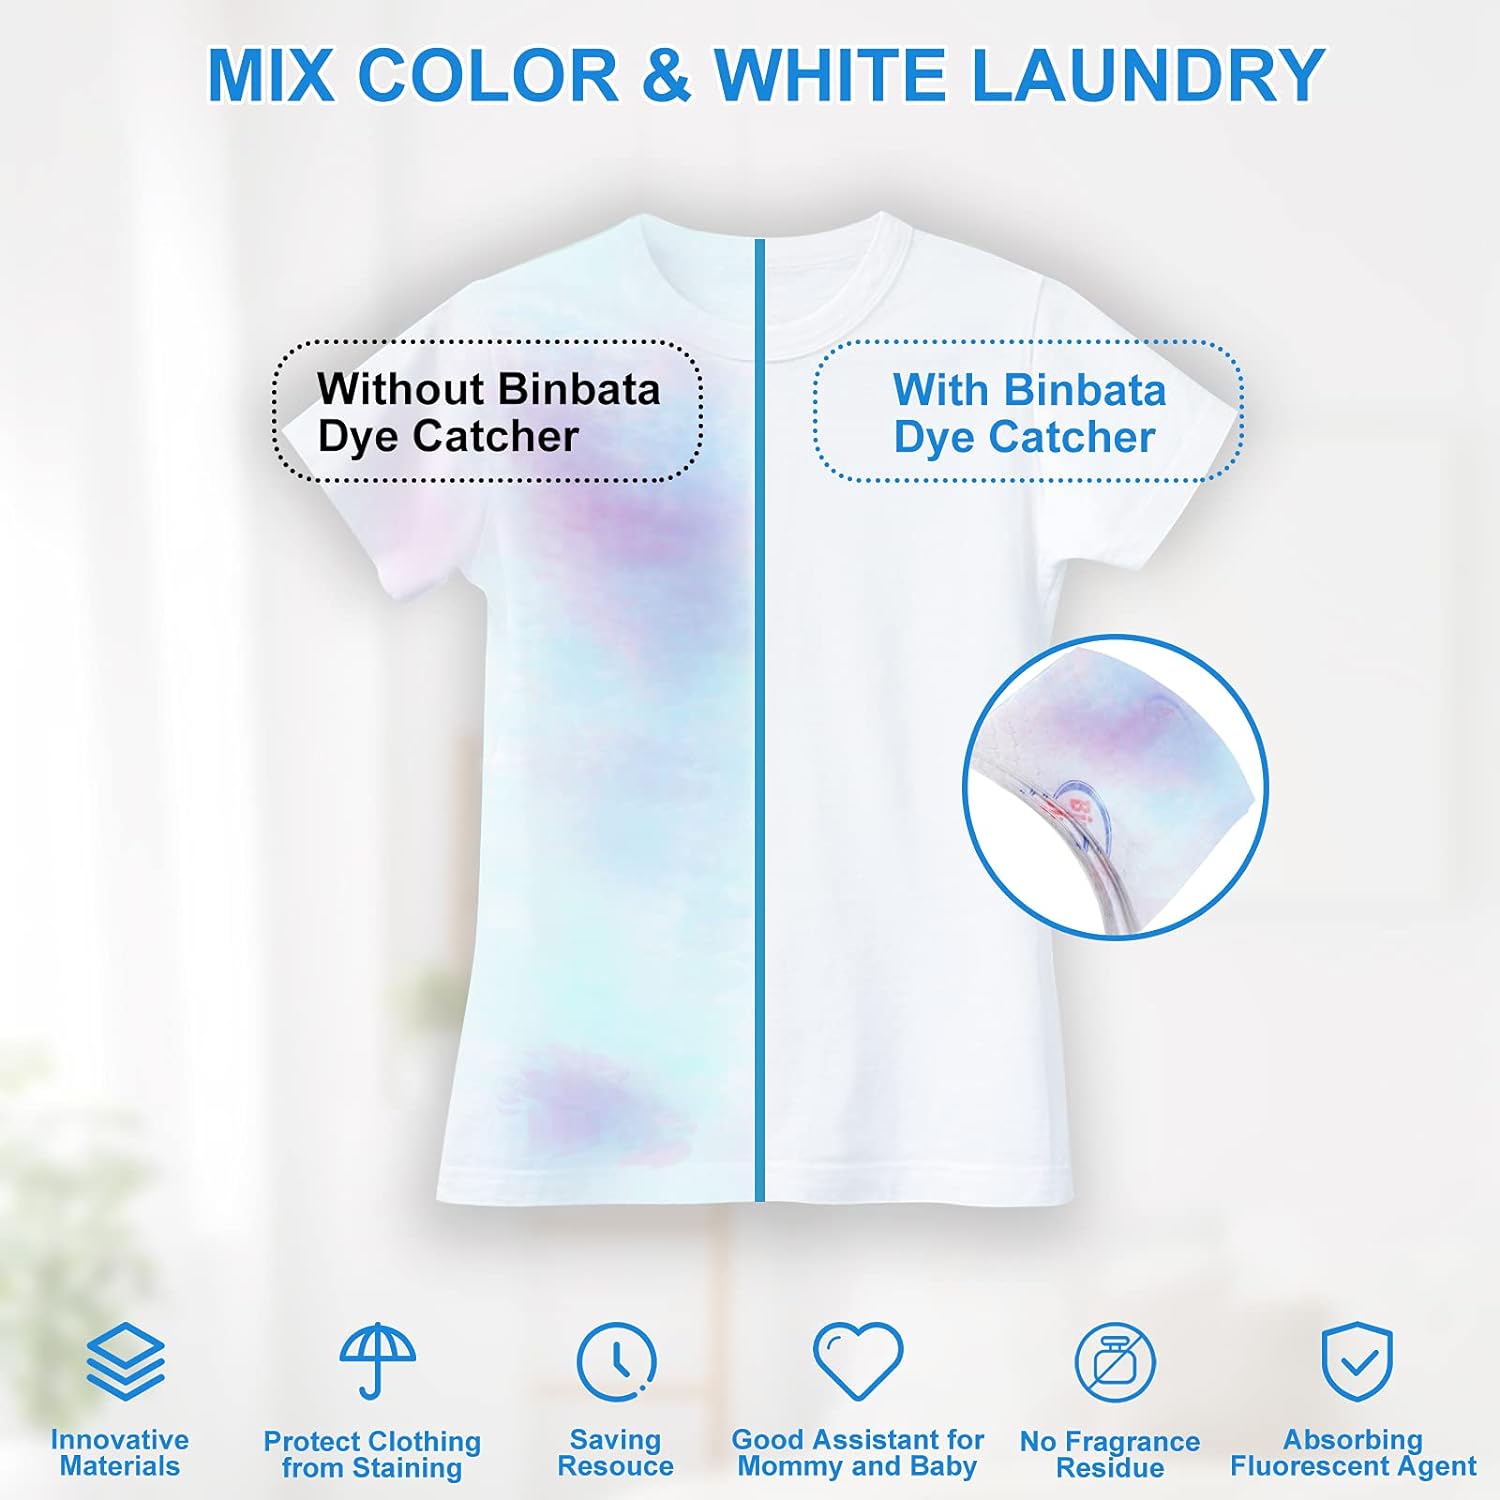 Binbata Color Grasper for Laundry 76 Count, Fragrance Free Dye Catcher Essential for Home Use, Dye Guard Grabber Sheets for Laundry in-Wash Sheets : Everything Else